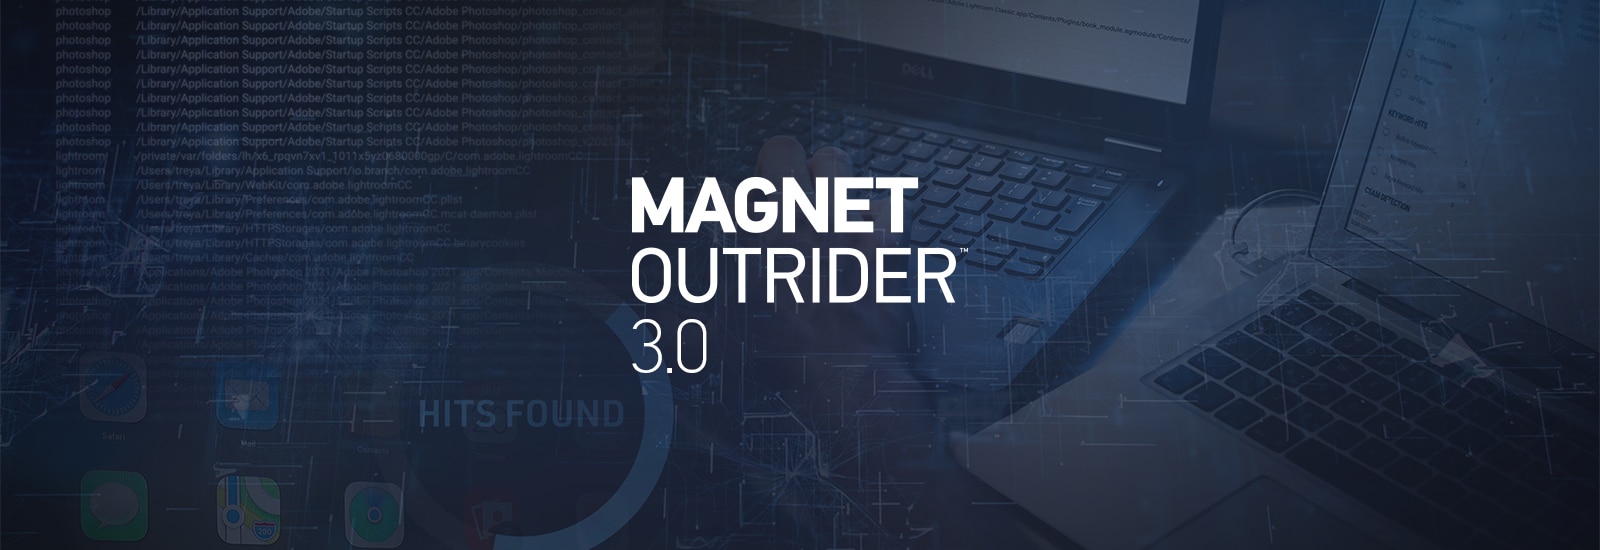 Magnet OUTRIDER 3.0